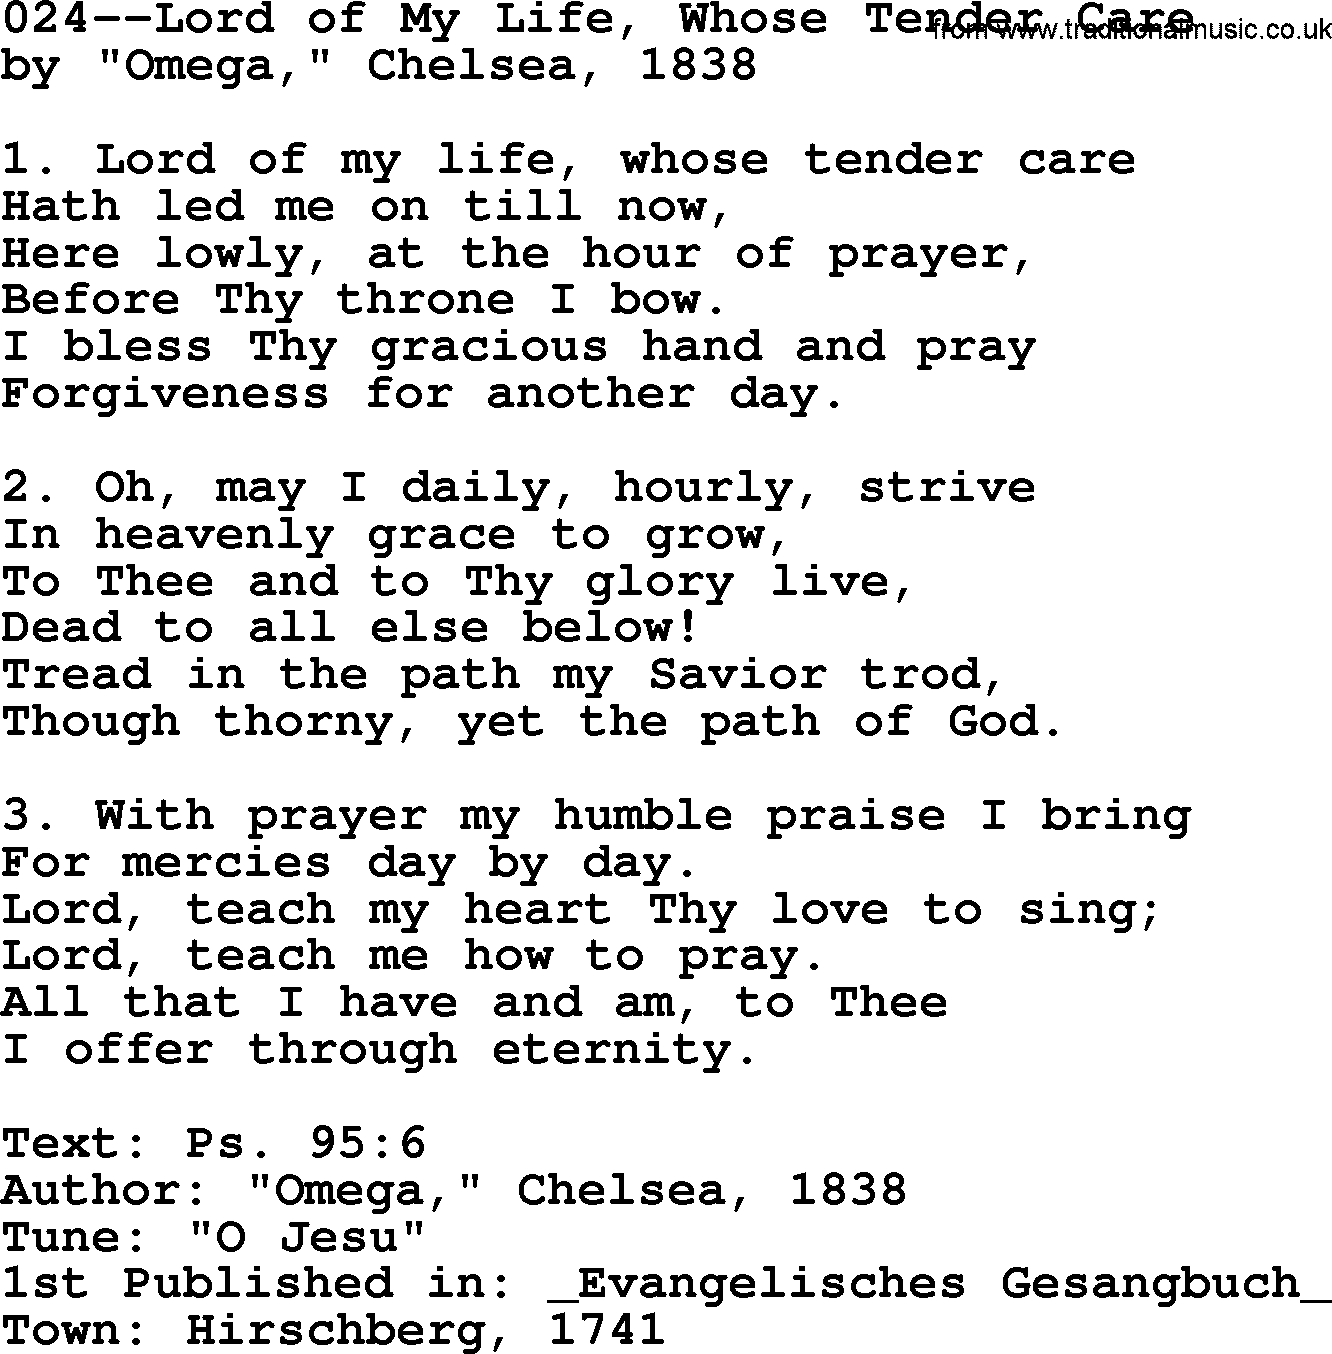 Lutheran Hymn: 024--Lord of My Life, Whose Tender Care.txt lyrics with PDF